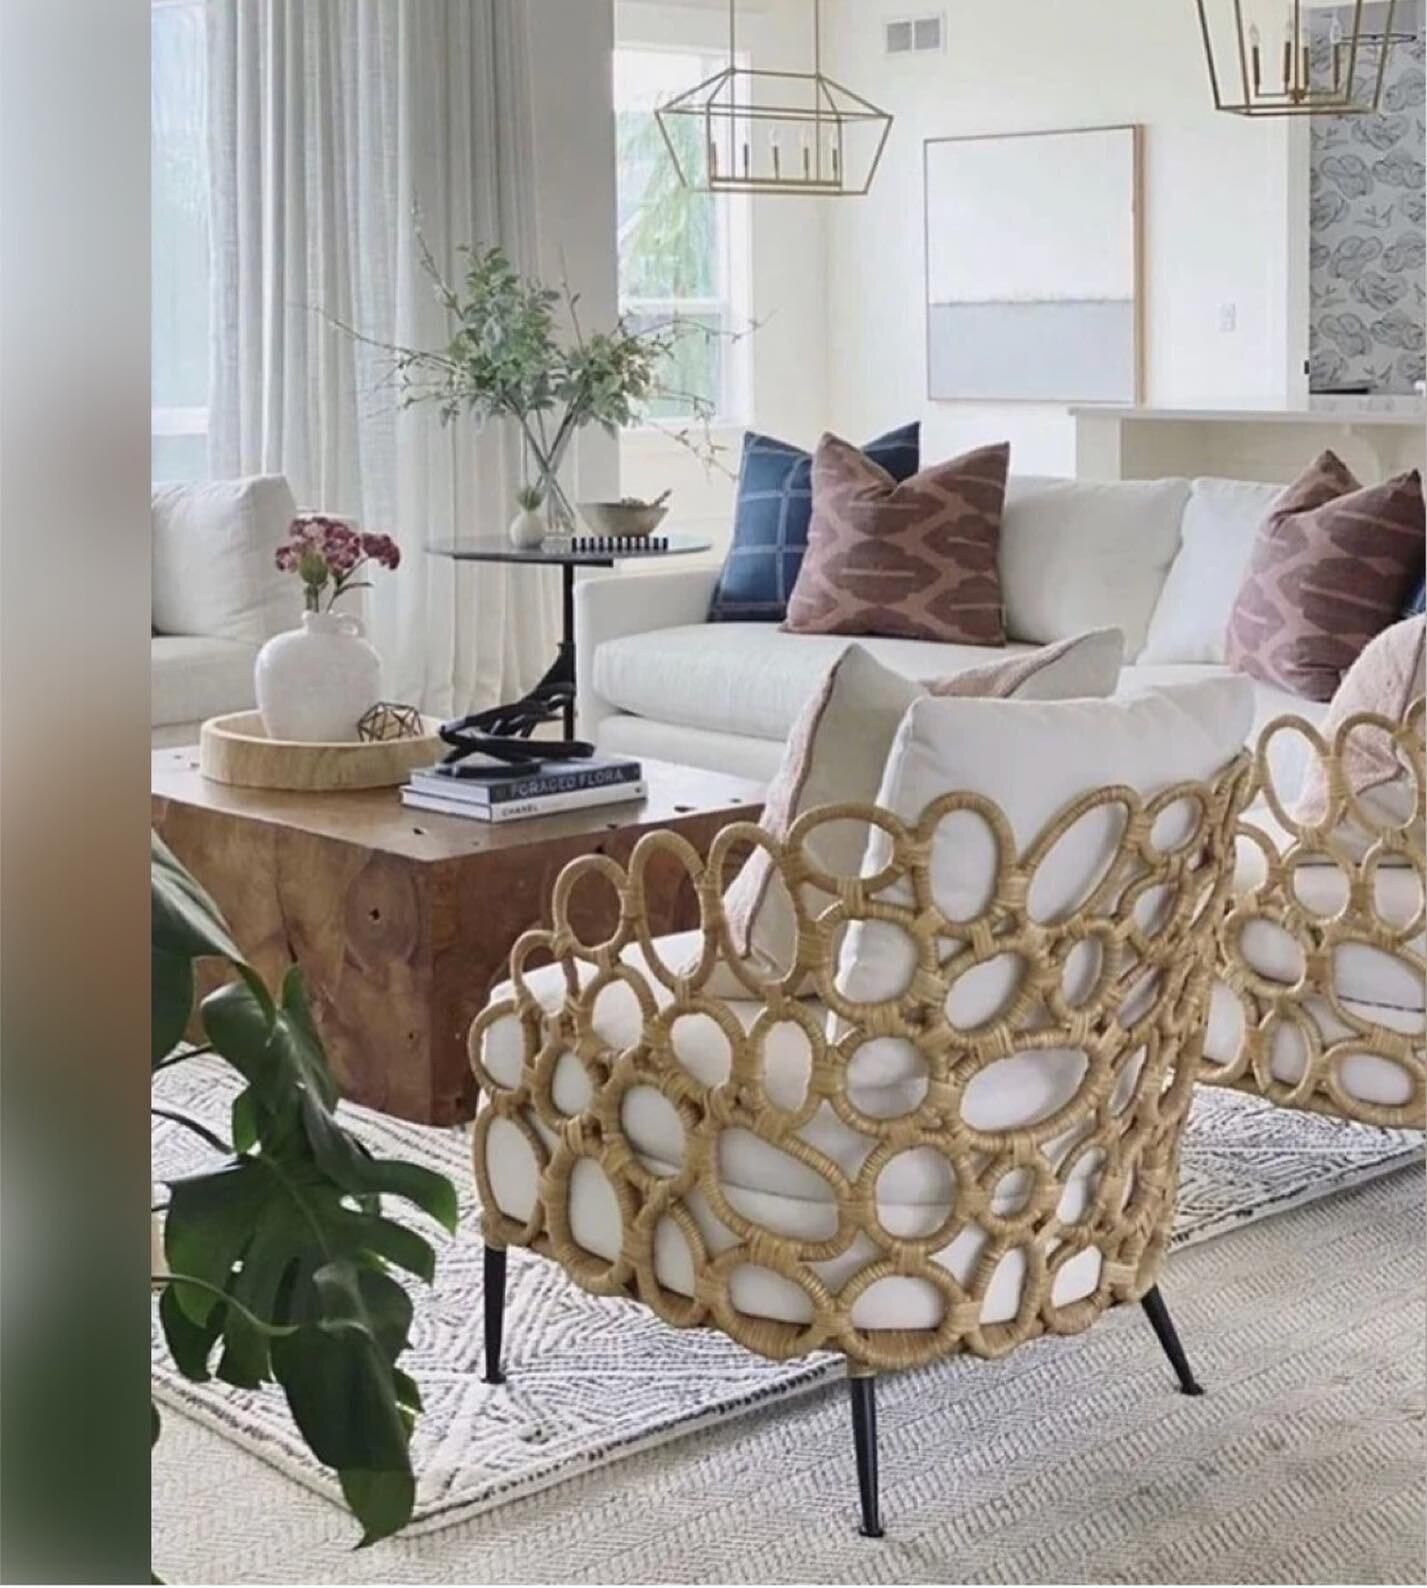 Beautiful room by dakovichinteriors 
&bull;
These soft colors and wool rug mixed with the wood and rattan bring a natural elements that connect us with nature. The details make all the difference!​​​​​​​​​
#dakovichinteriors#designinspiration#livingr